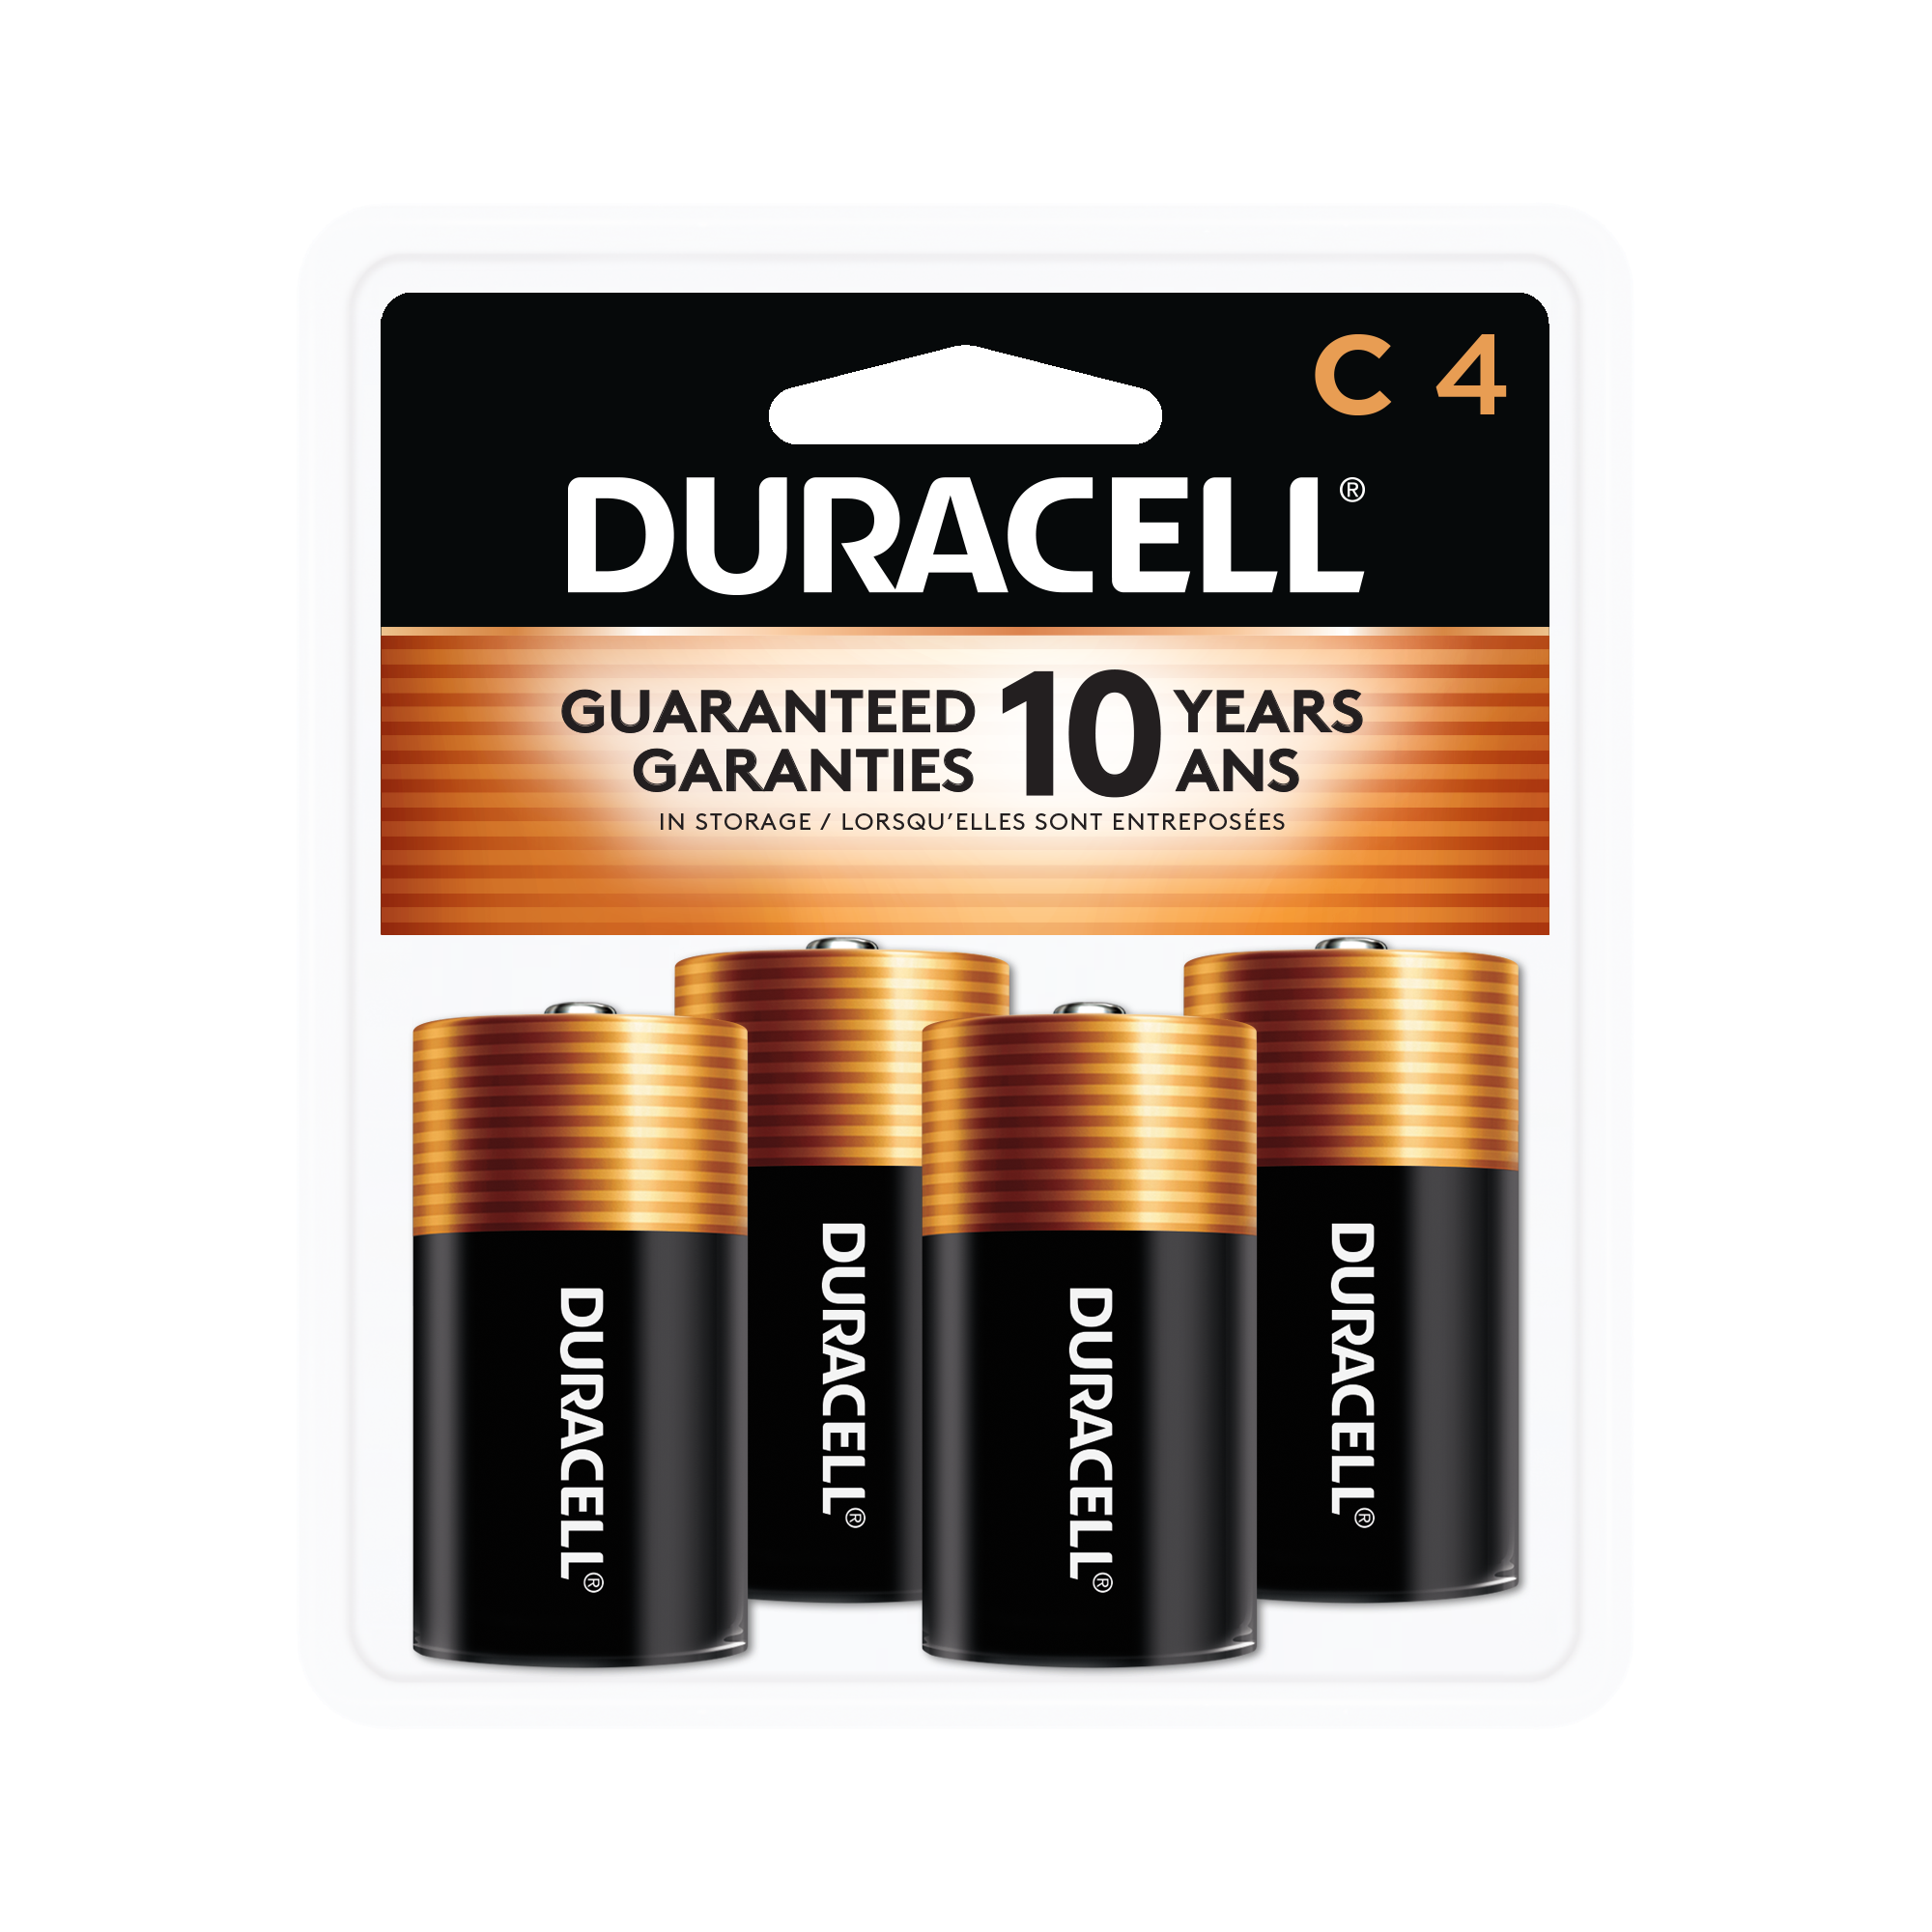 Duracell Coppertop Alkaline C Batteries (4-Pack) in the C